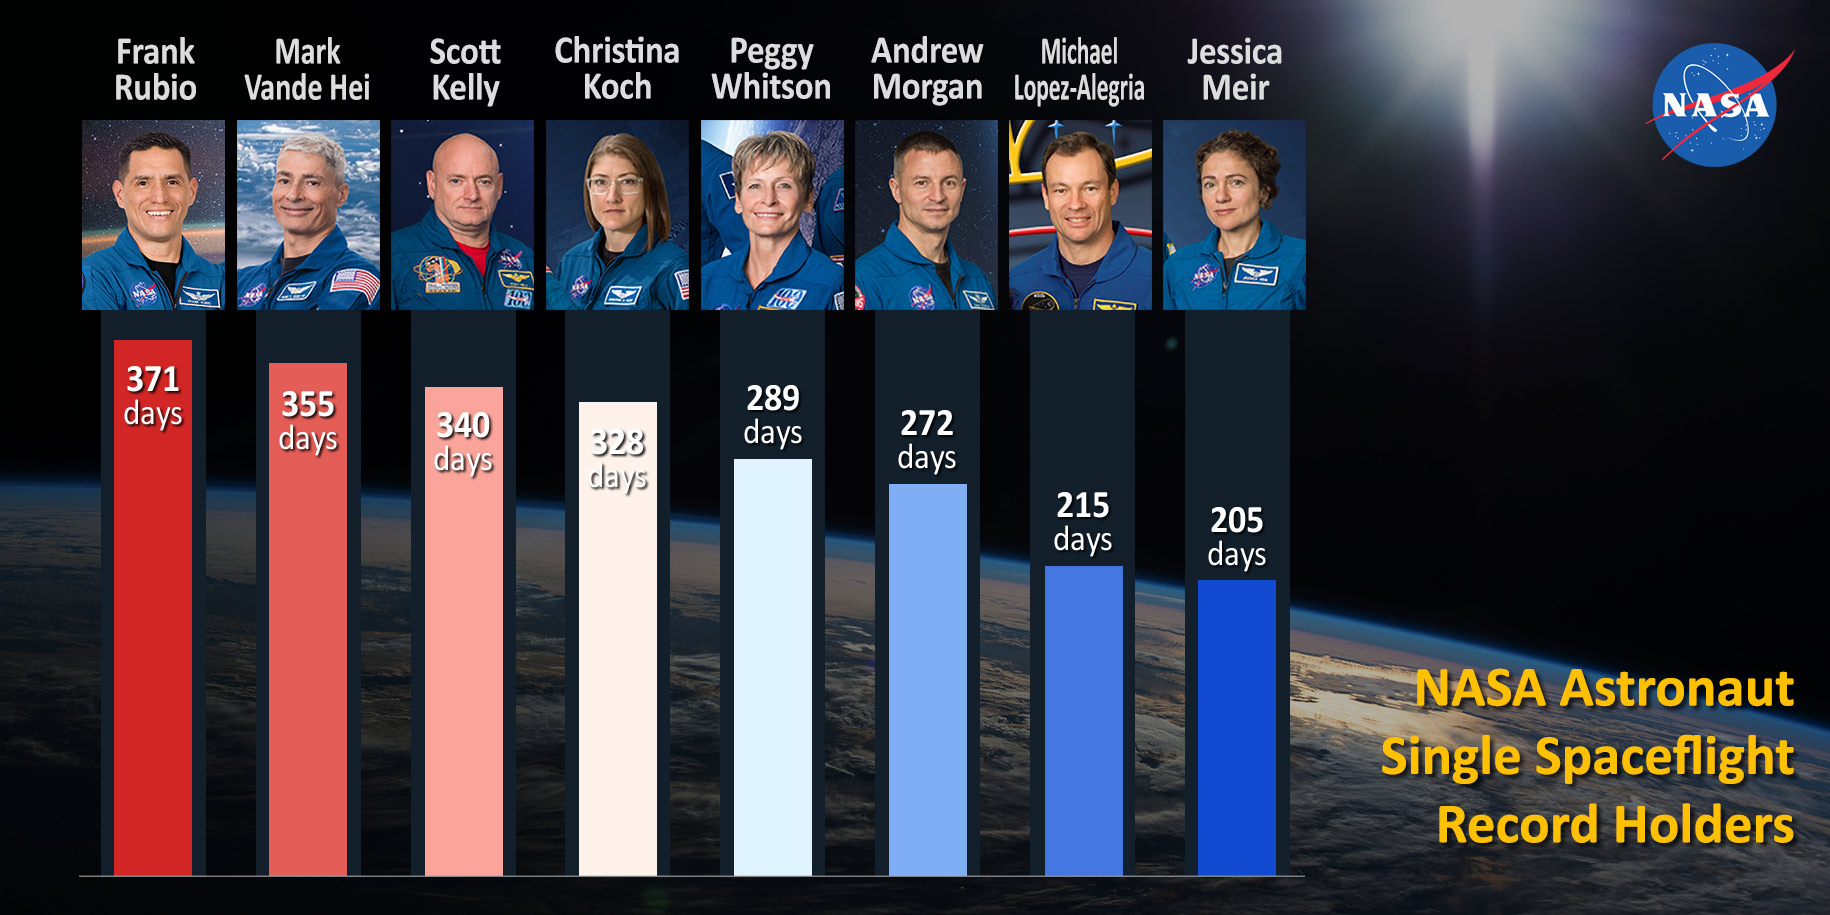 NASA astronaut Frank Rubio completed a single mission aboard the International Space Station of 371 days on Sept. 27, 2023. Rubio surpasses NASA astronaut Mark Vande Hei who ended his mission after 355 days on March 30, 2022.